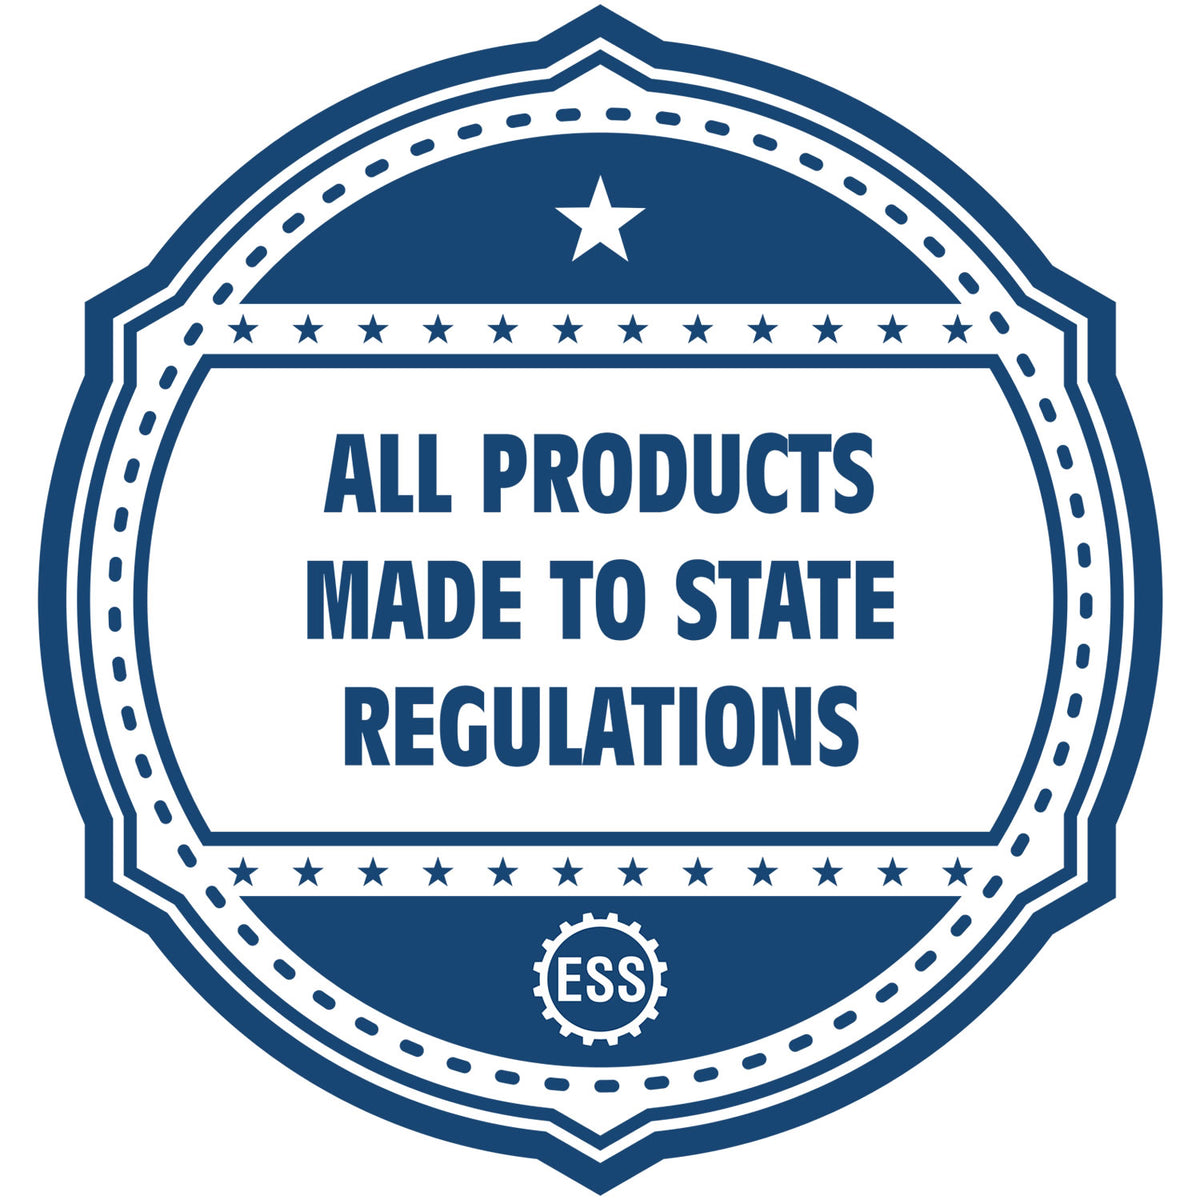 An icon or badge element for the Indiana Landscape Architectural Seal Stamp showing that this product is made in compliance with state regulations.